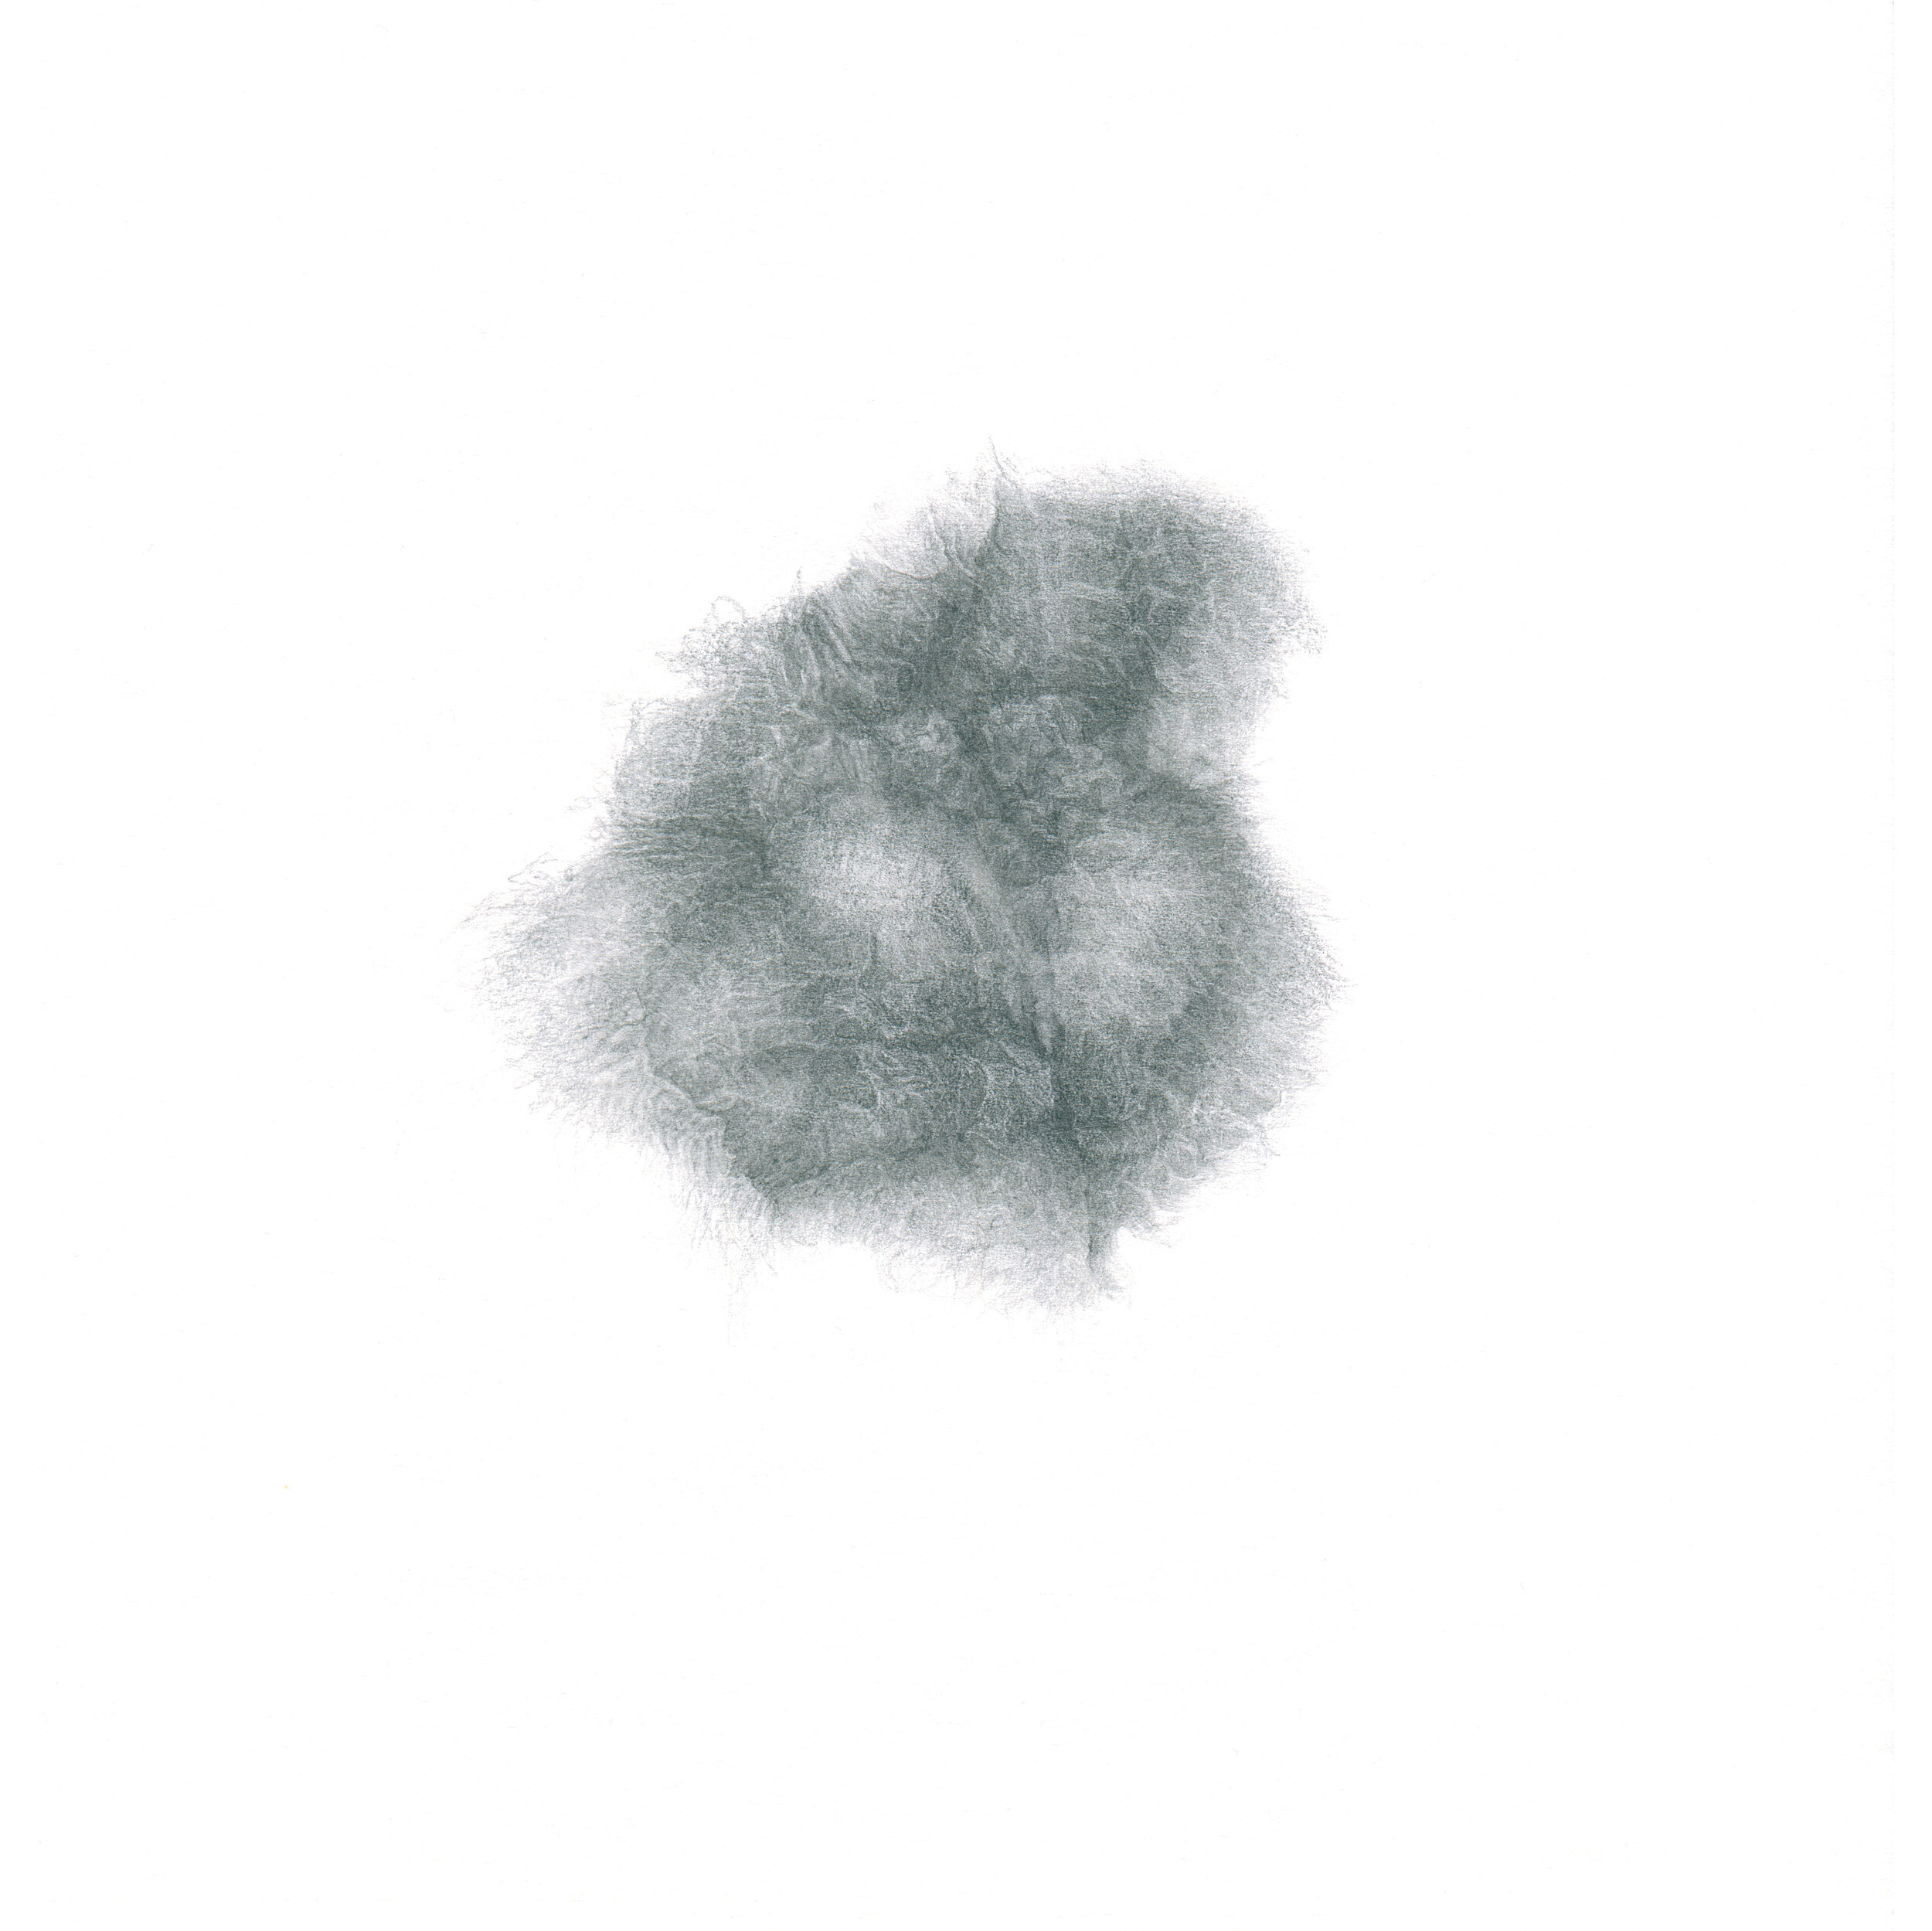  Drawing 011, 2013  Graphite on paper, 21.5 x 21.5 cm 